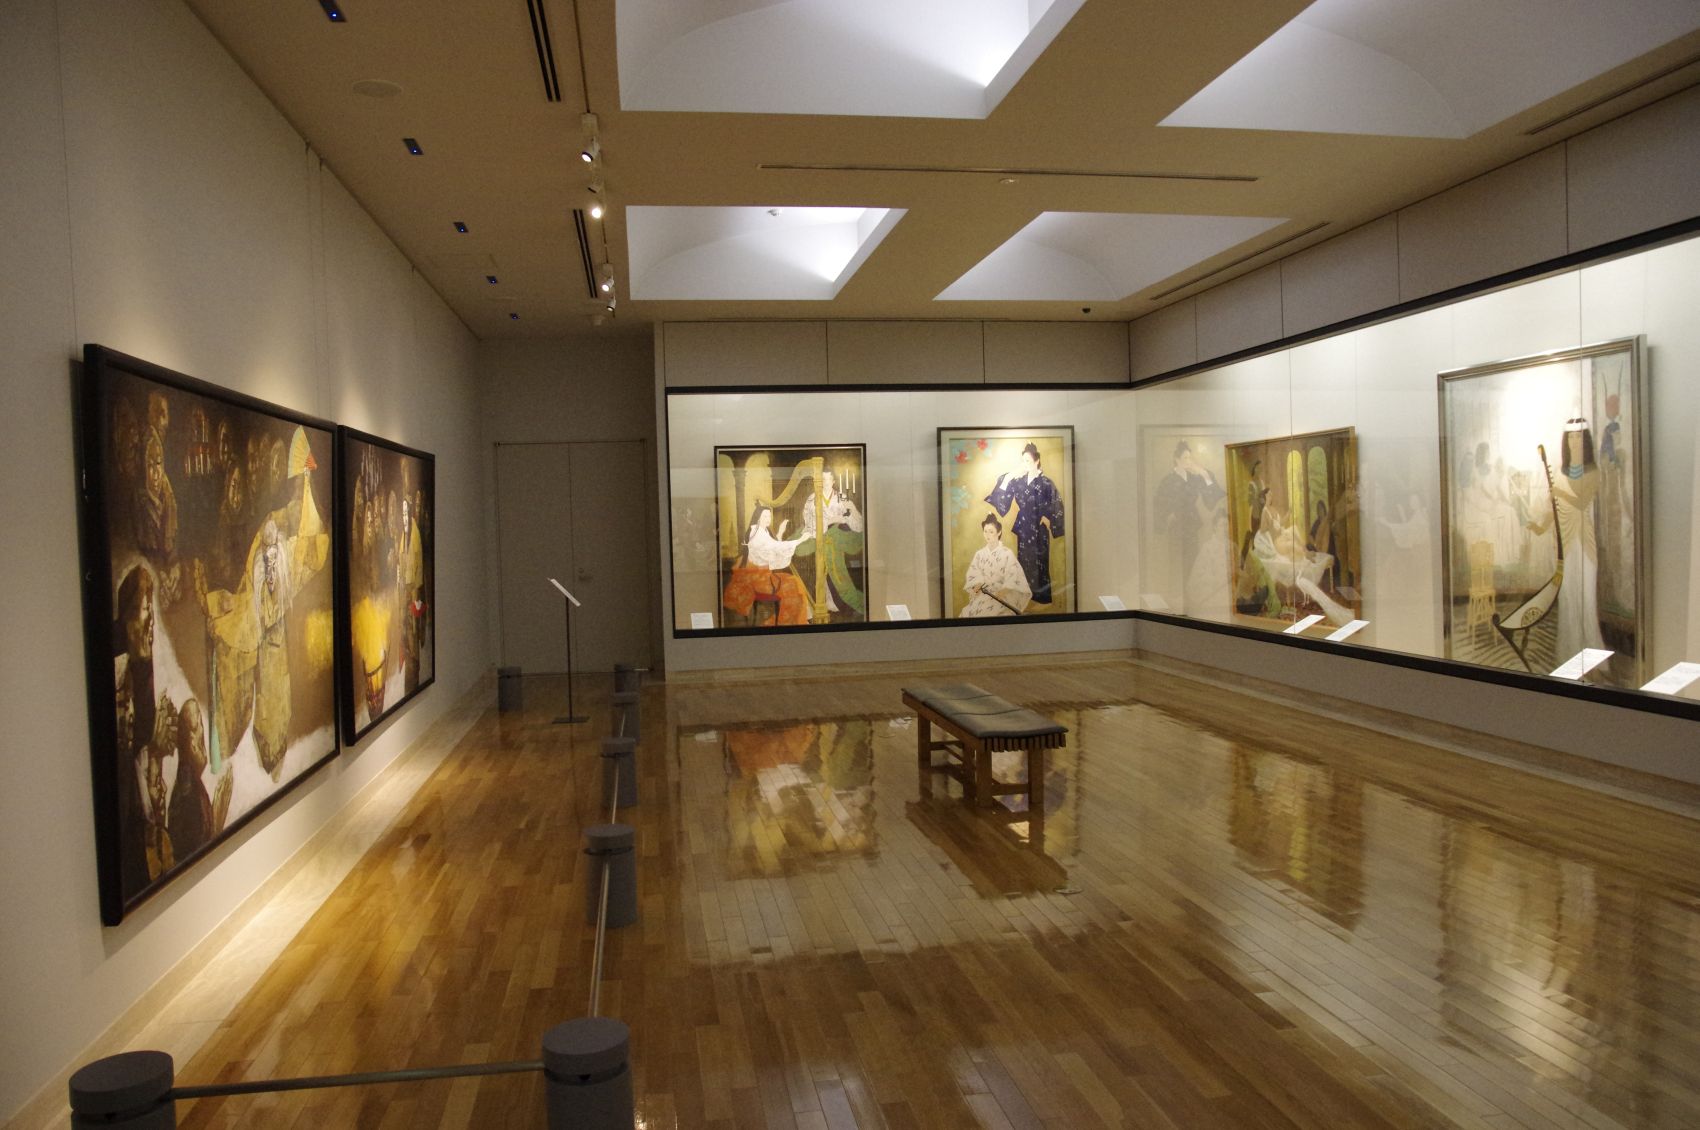 You Can Almost Hear Music As You View This Matsuoka Museum of Art Exhibition